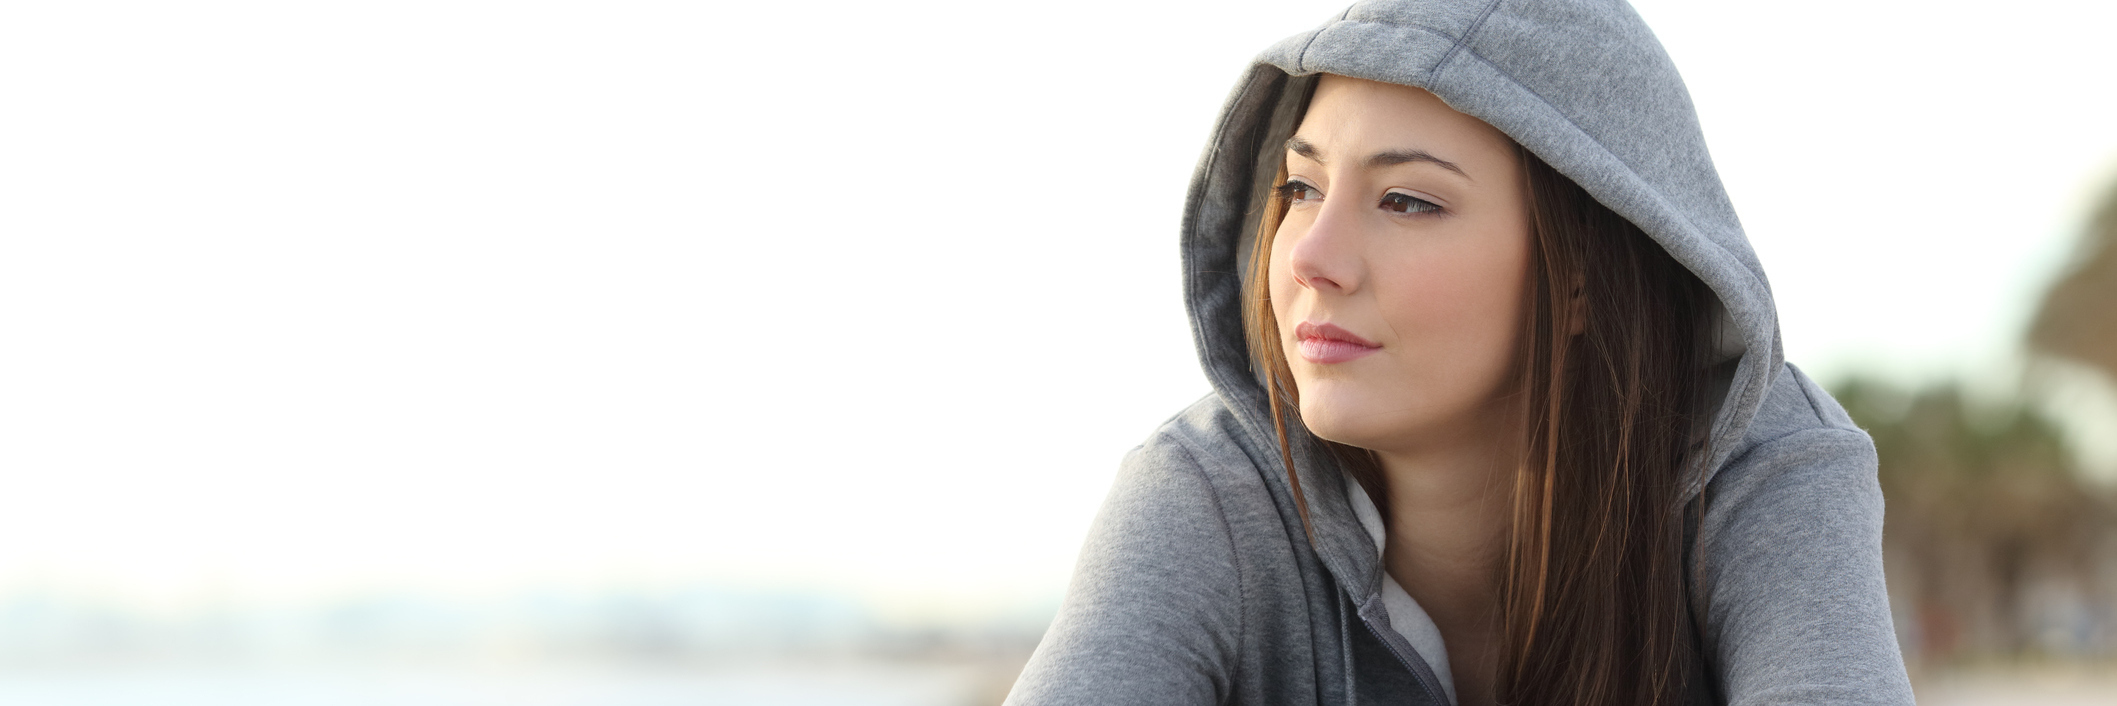 Close up of woman wearing a gray hoodie looking pensive